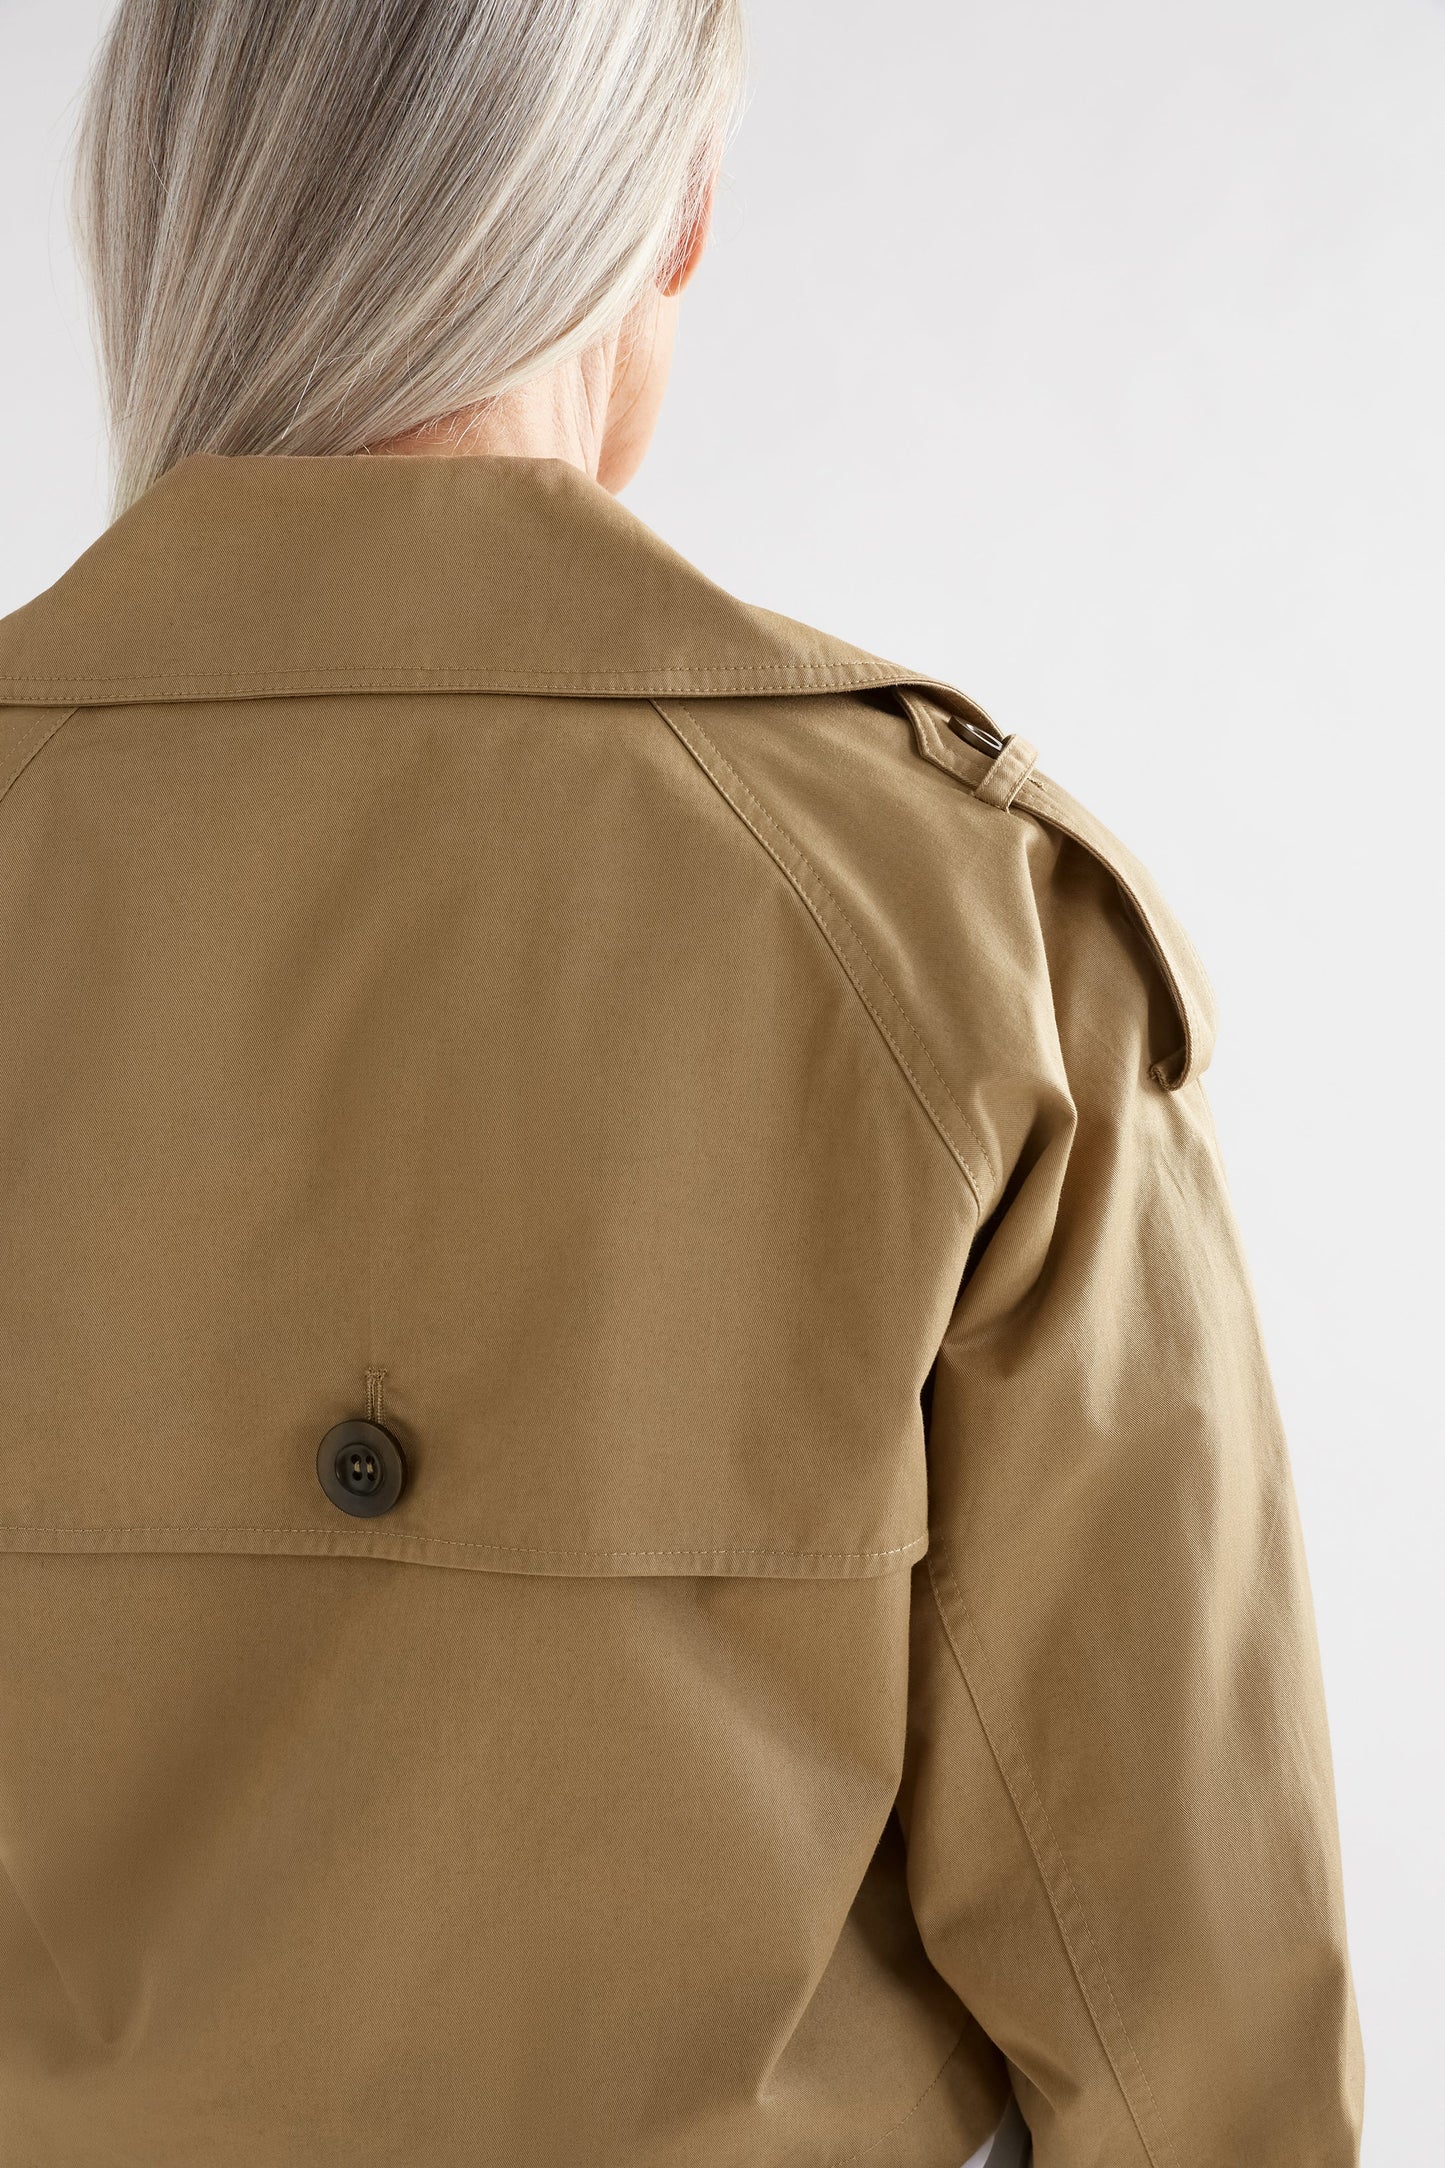 Ruoy Organic Cotton Twill Cropped Trench Style Jacket Model back Detail | SANDSTONE